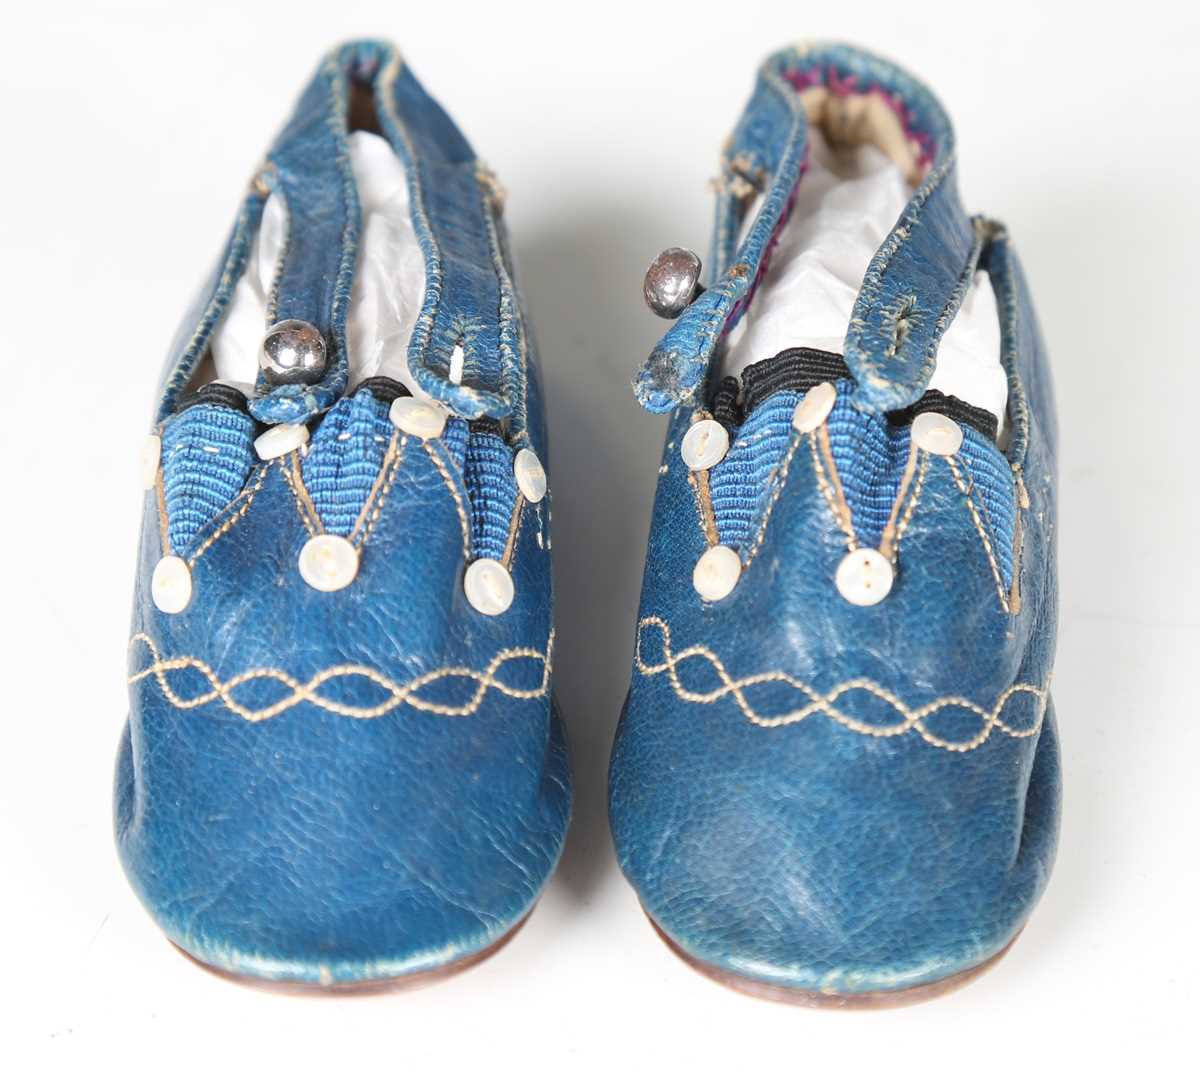 A pair of 19th century blue leather infant's shoes with applied mother-of-pearl buttons and polished - Image 7 of 8